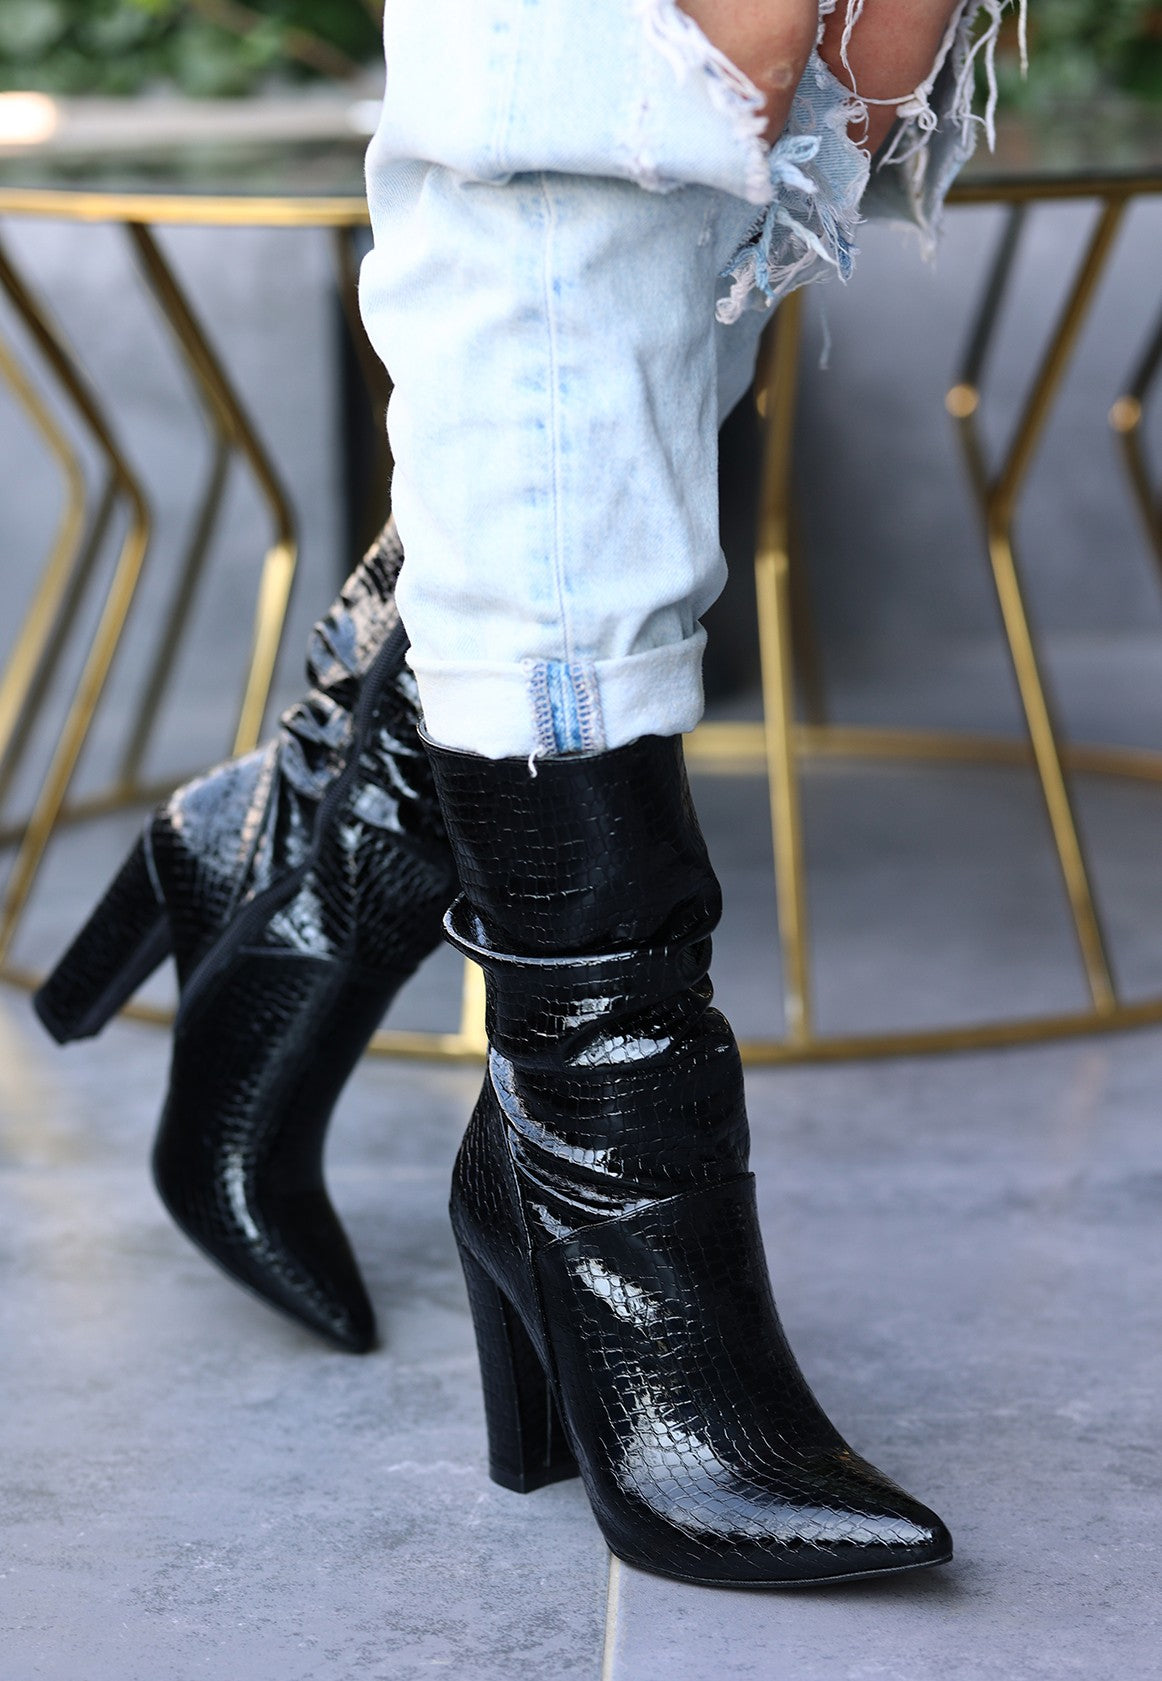 Women's Erita Black Patent Leather Patterned Heeled Boots - STREETMODE ™